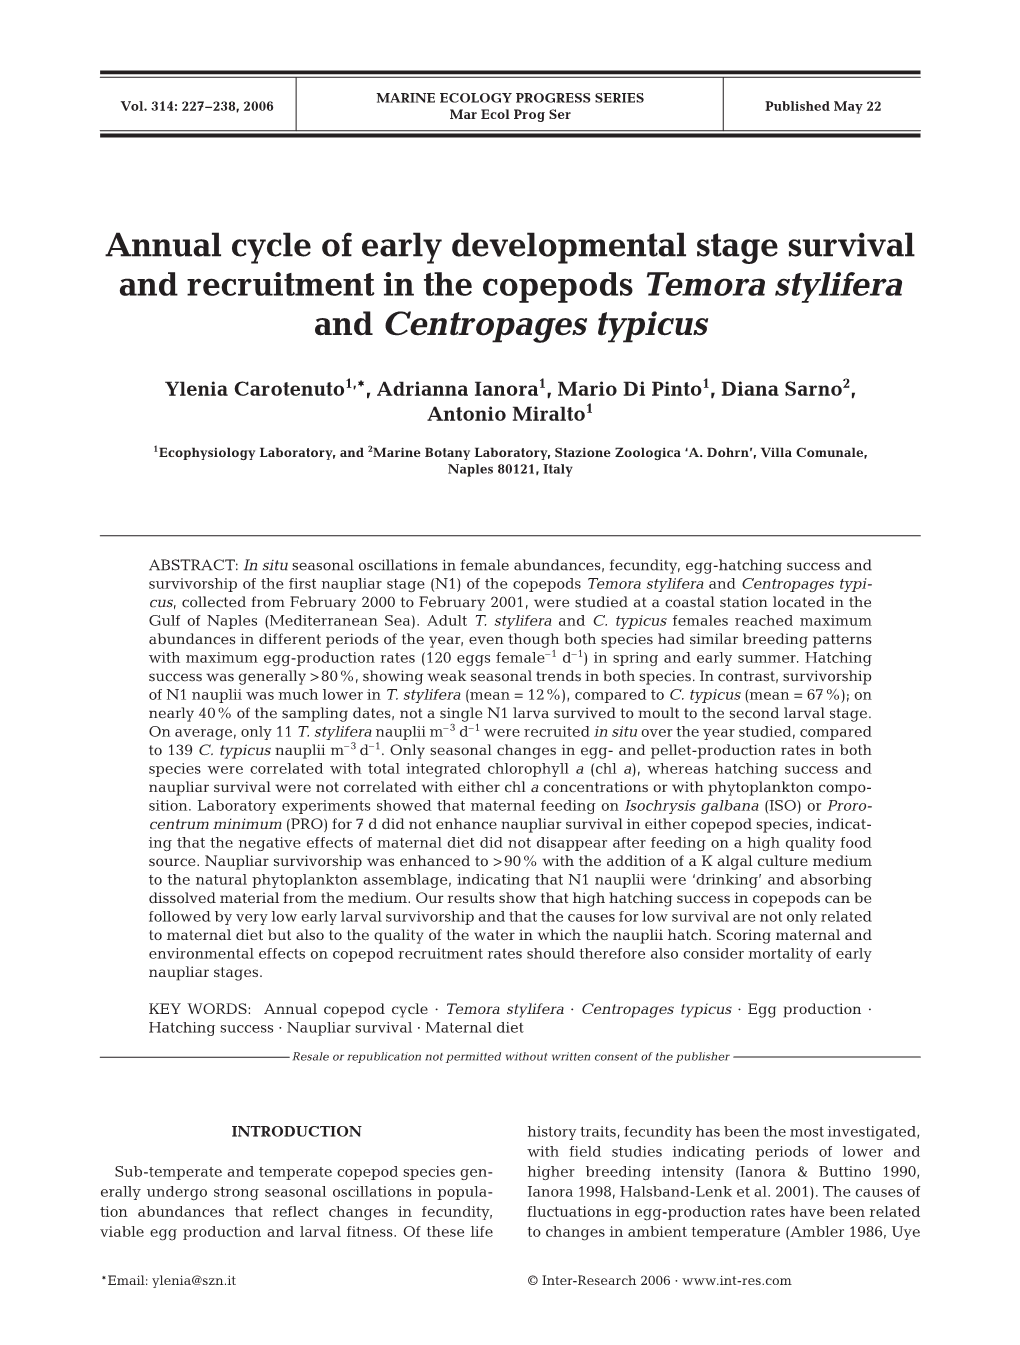 Annual Cycle of Early Developmental Stage Survival and Recruitment in the Copepods Temora Stylifera and Centropages Typicus